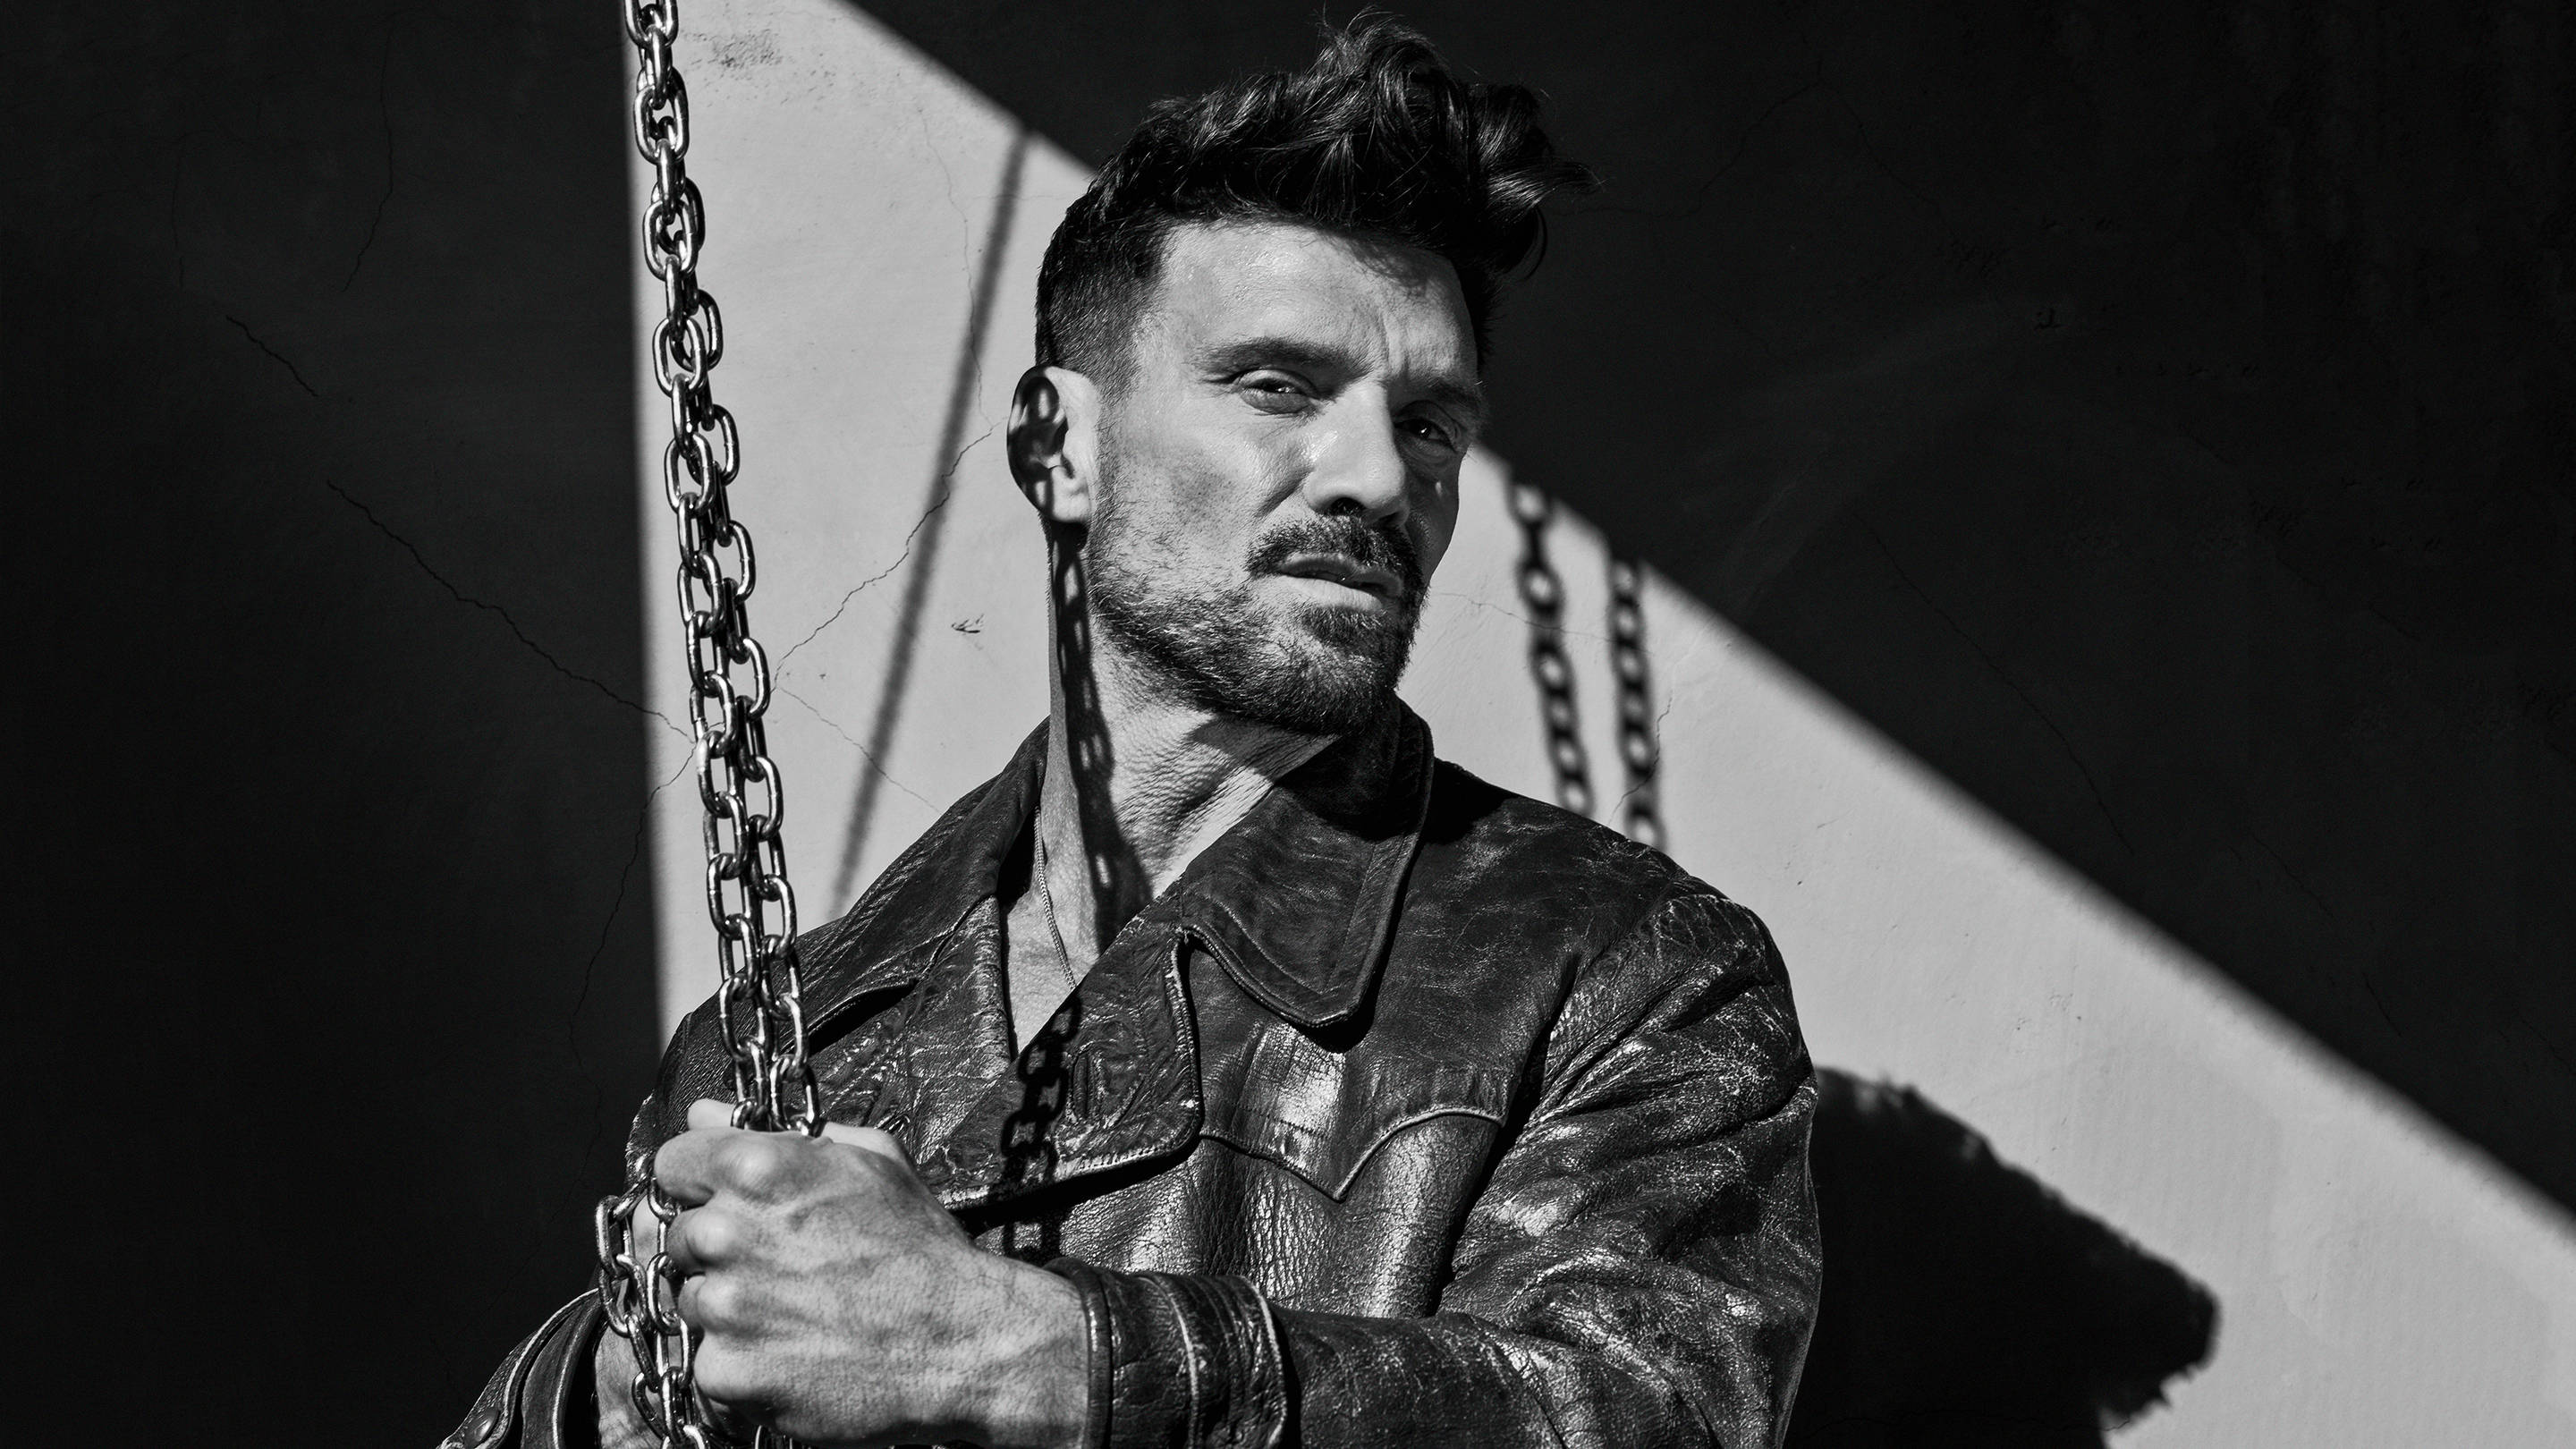 Frank Grillo poses for Playboy, Talks Closeted MMA Fighters.